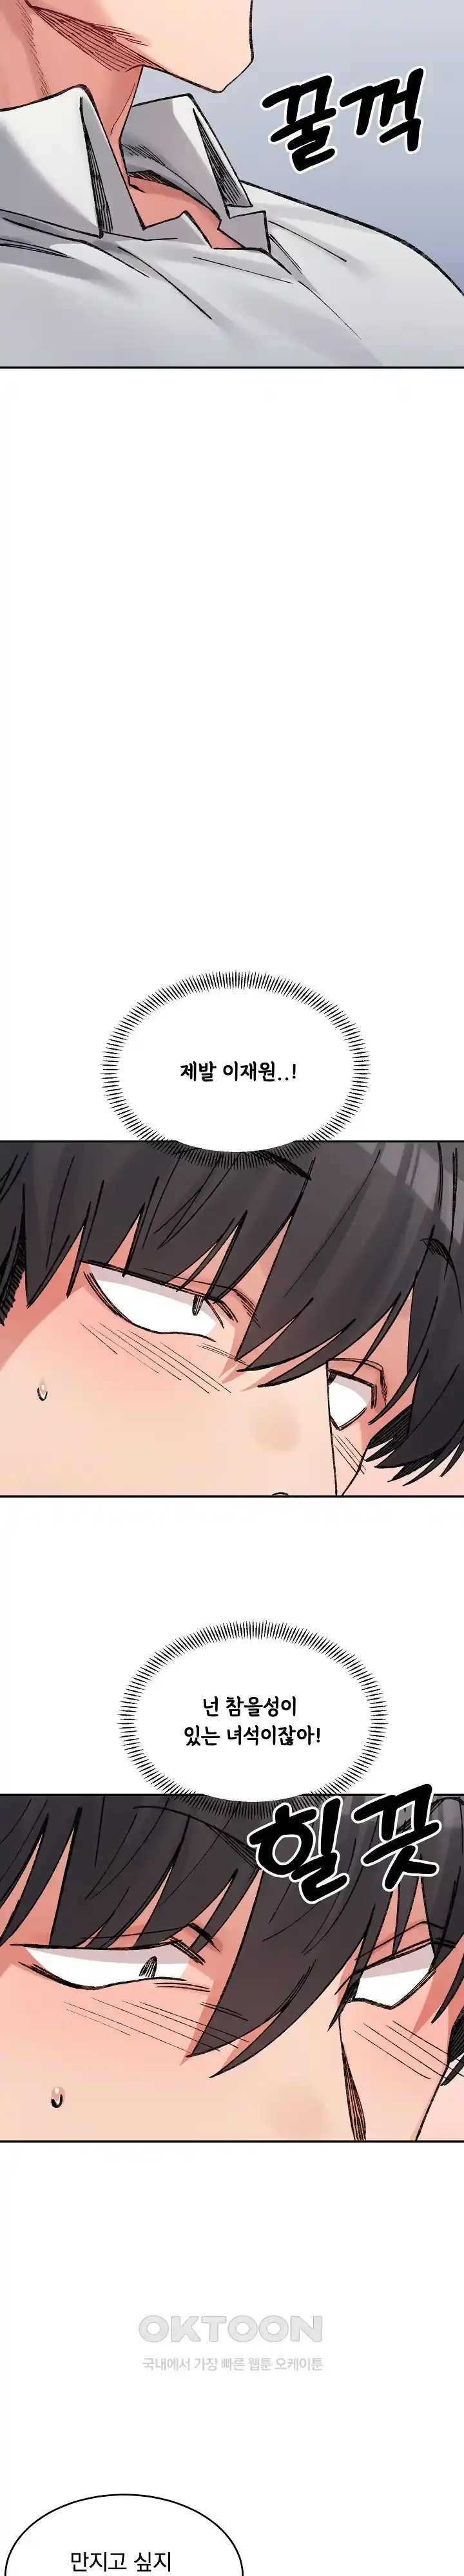 a-delicate-relationship-raw-chap-36-14